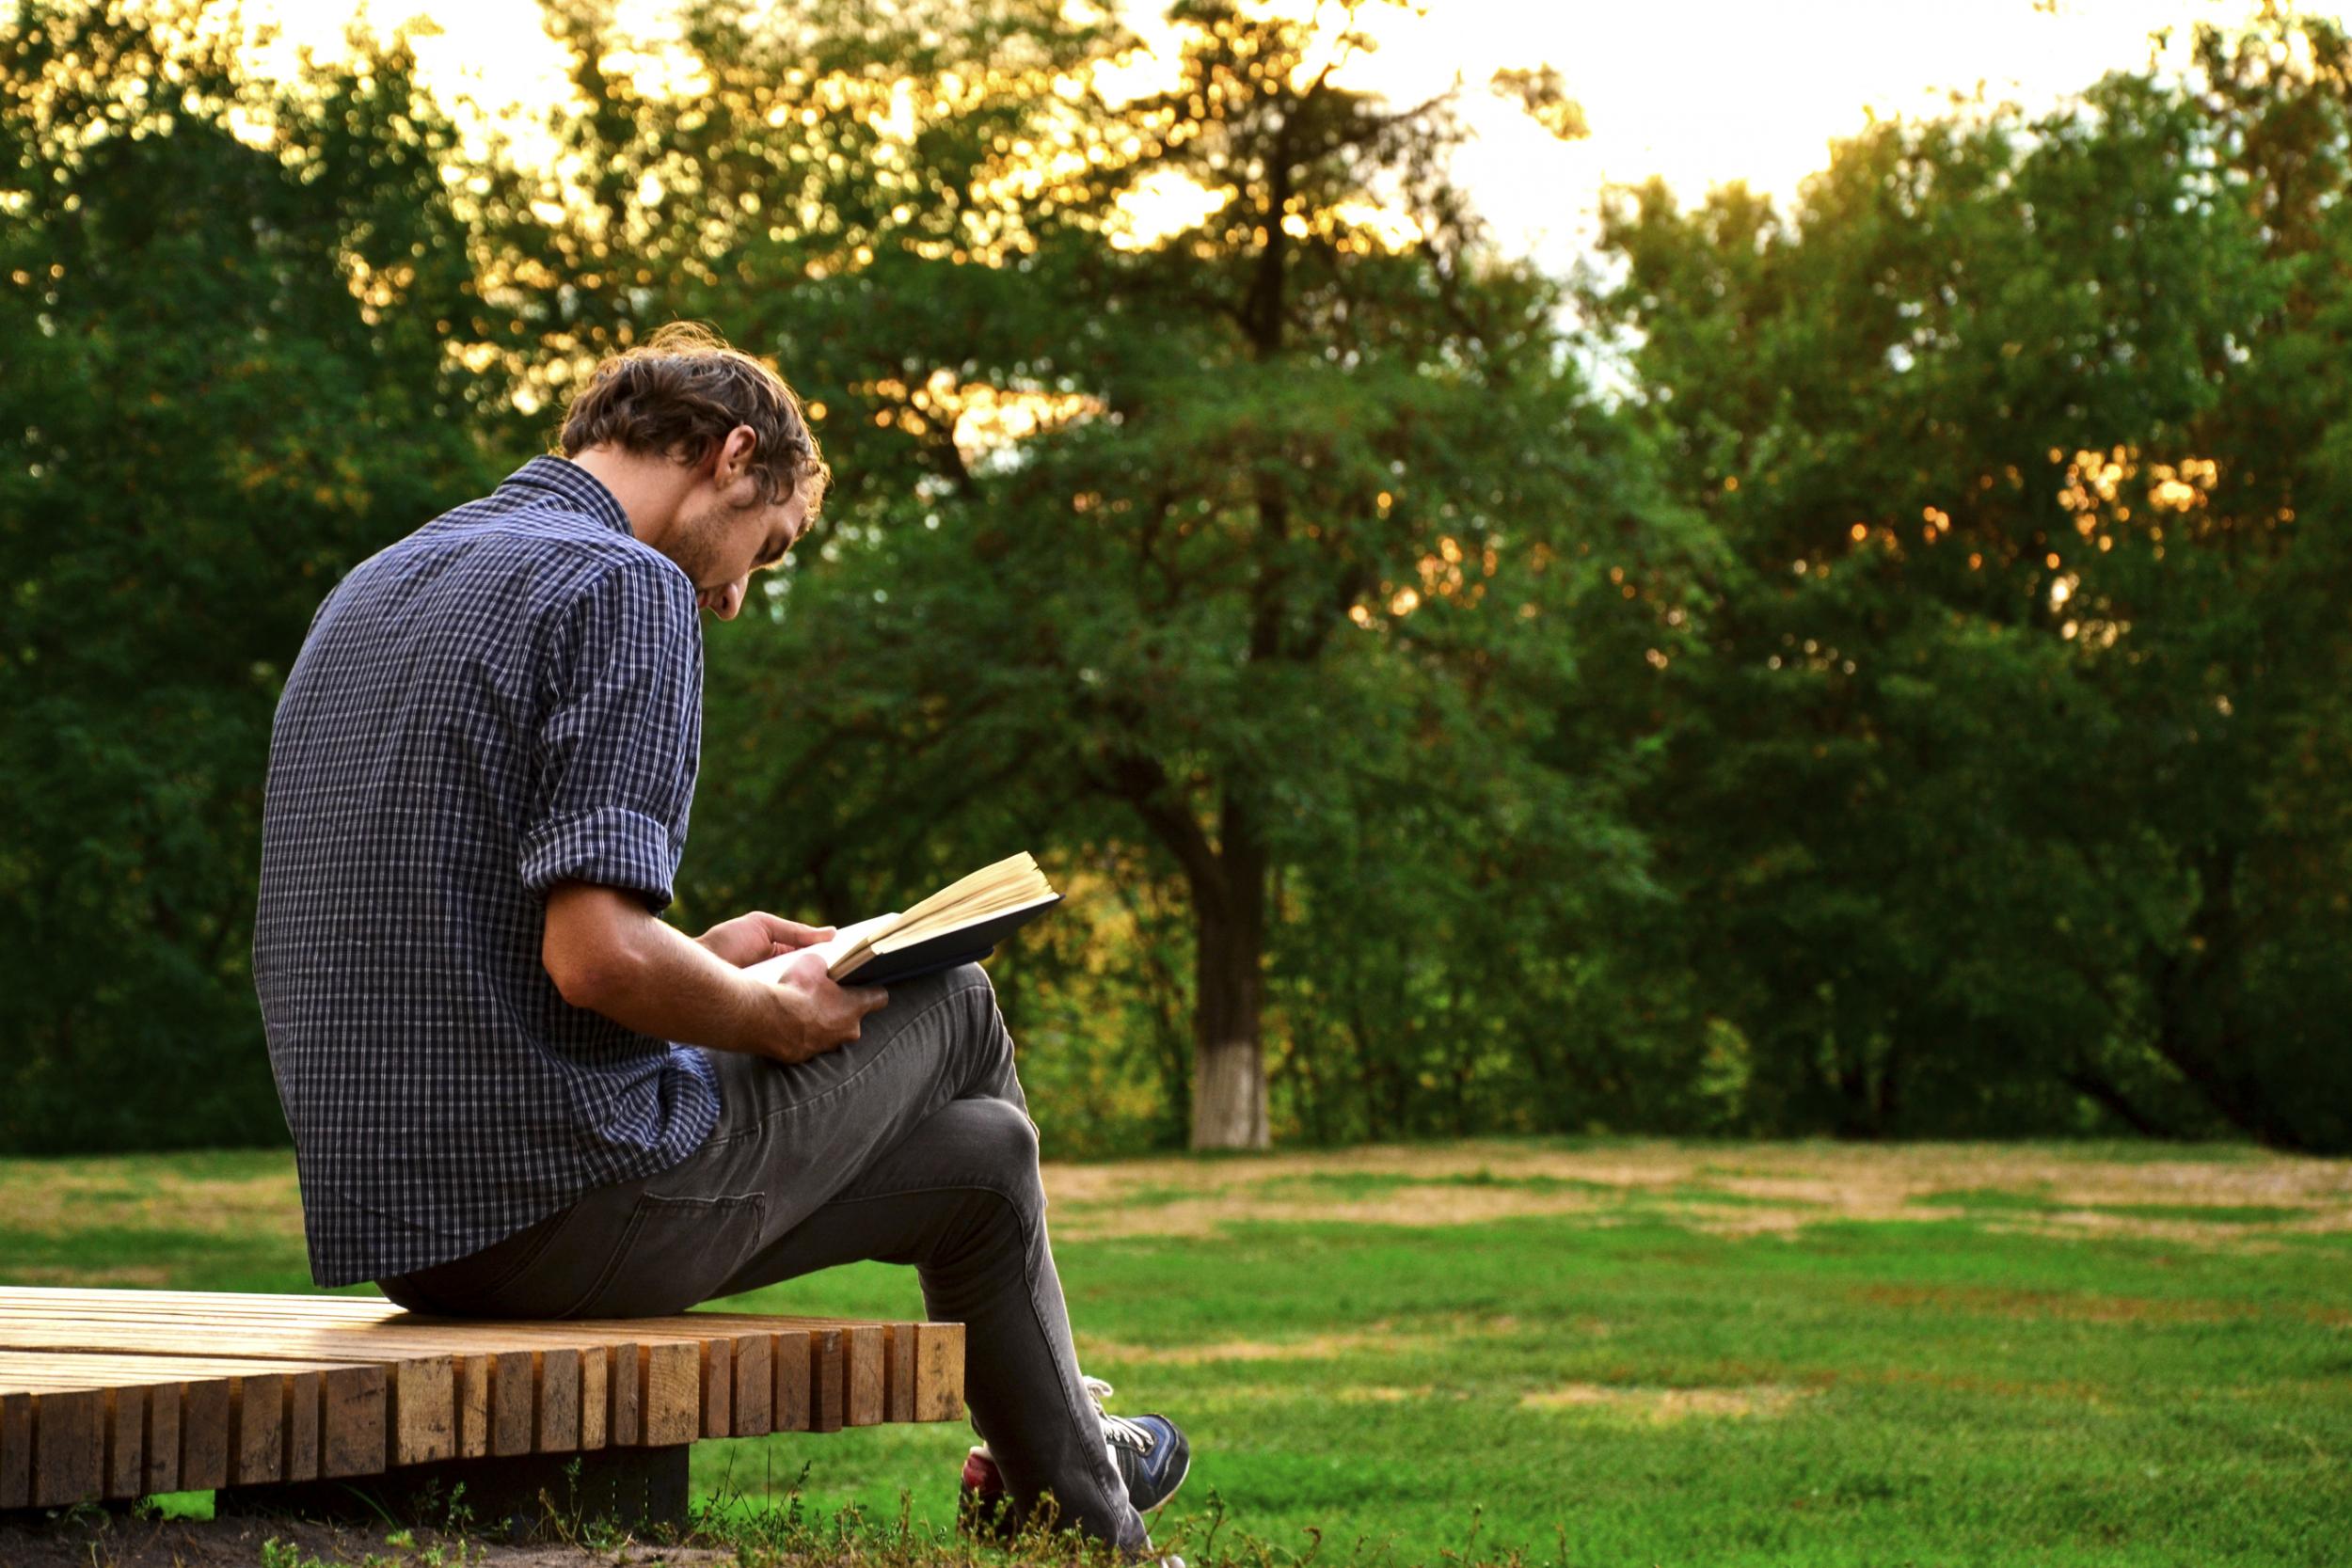 A man sits on a bench in a park reading a book with trees in the background.